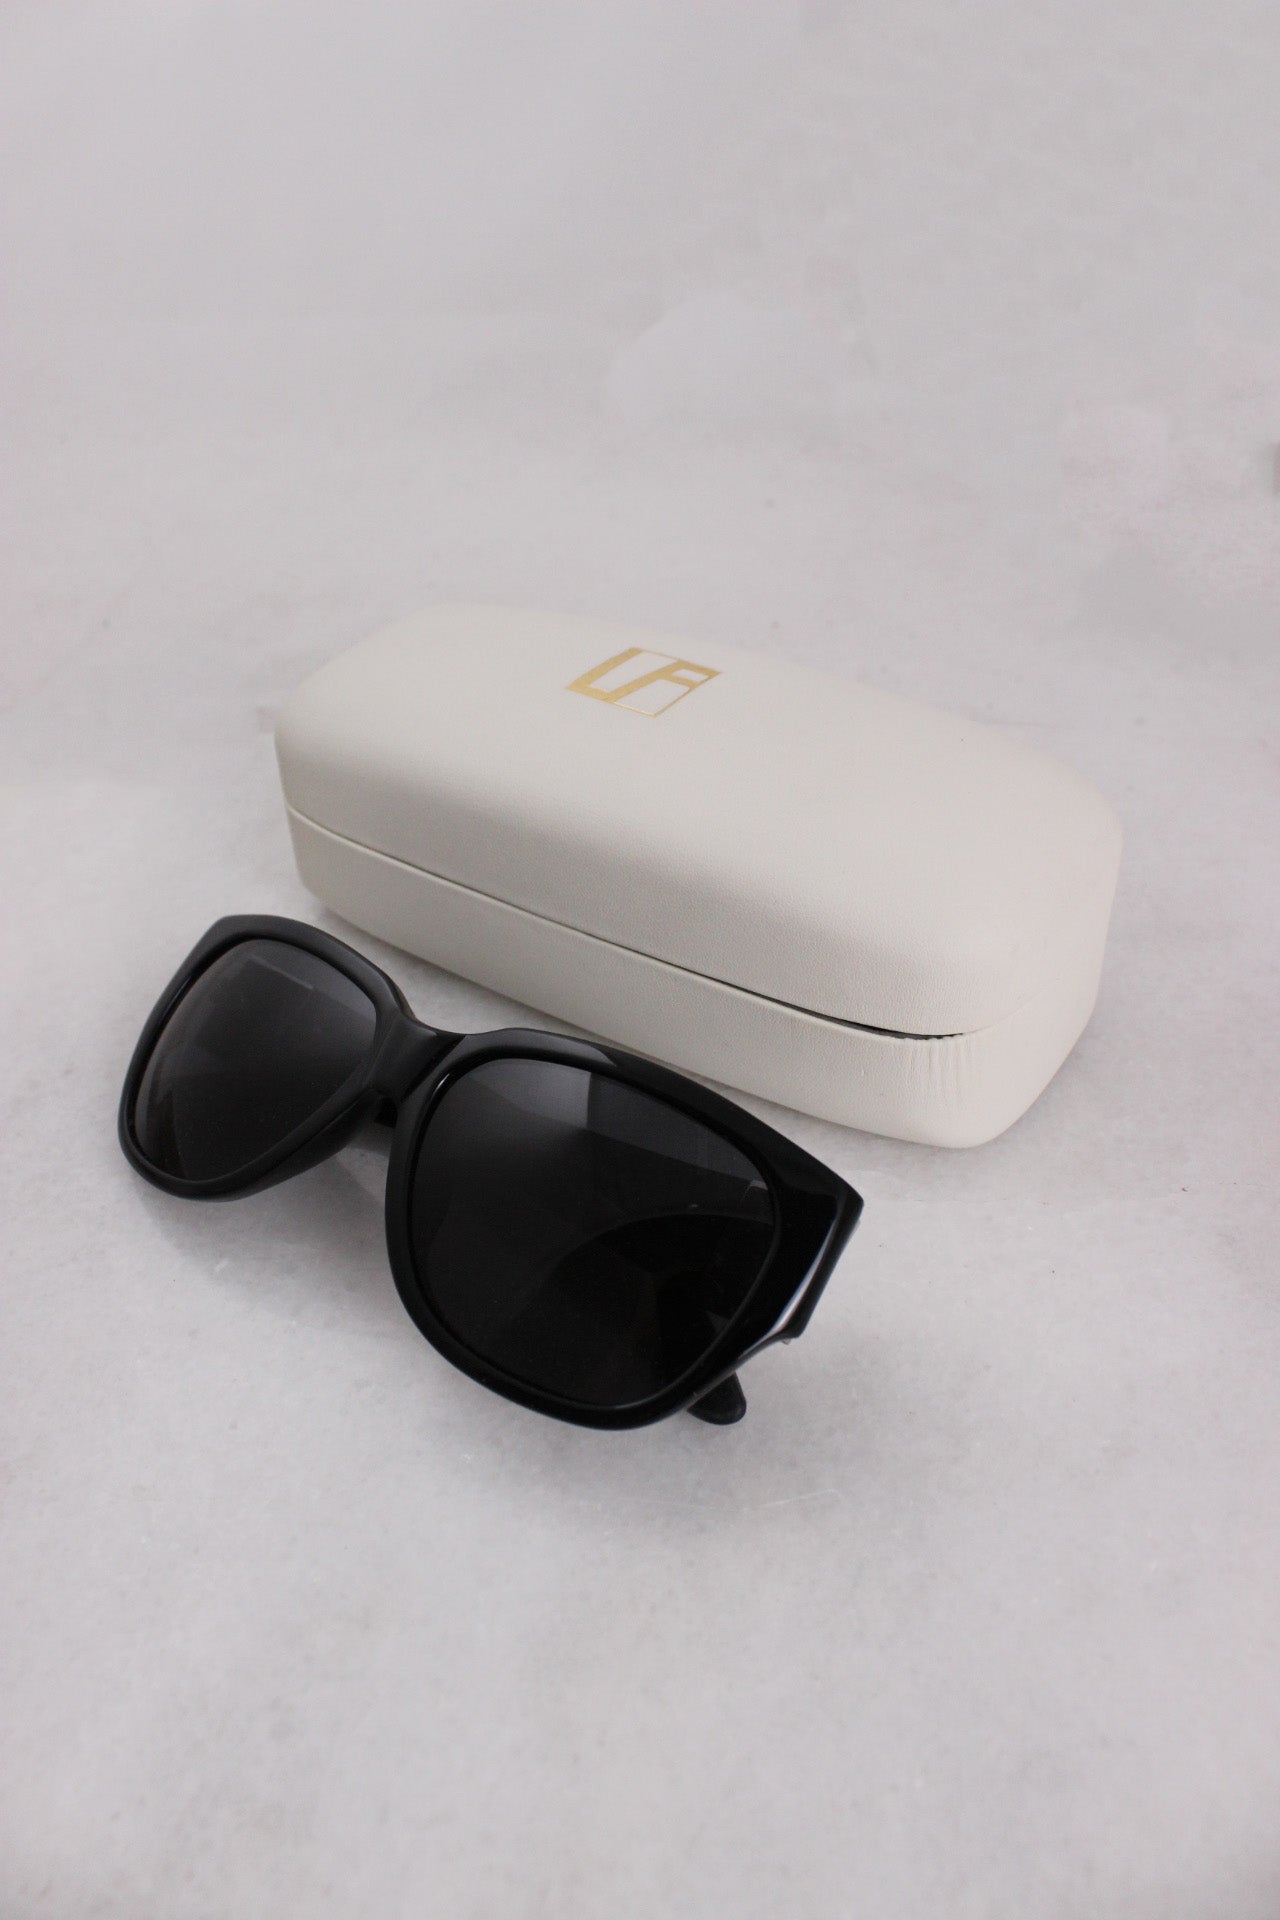 black sunglasses with branded case. case has text 'l f' on top. 